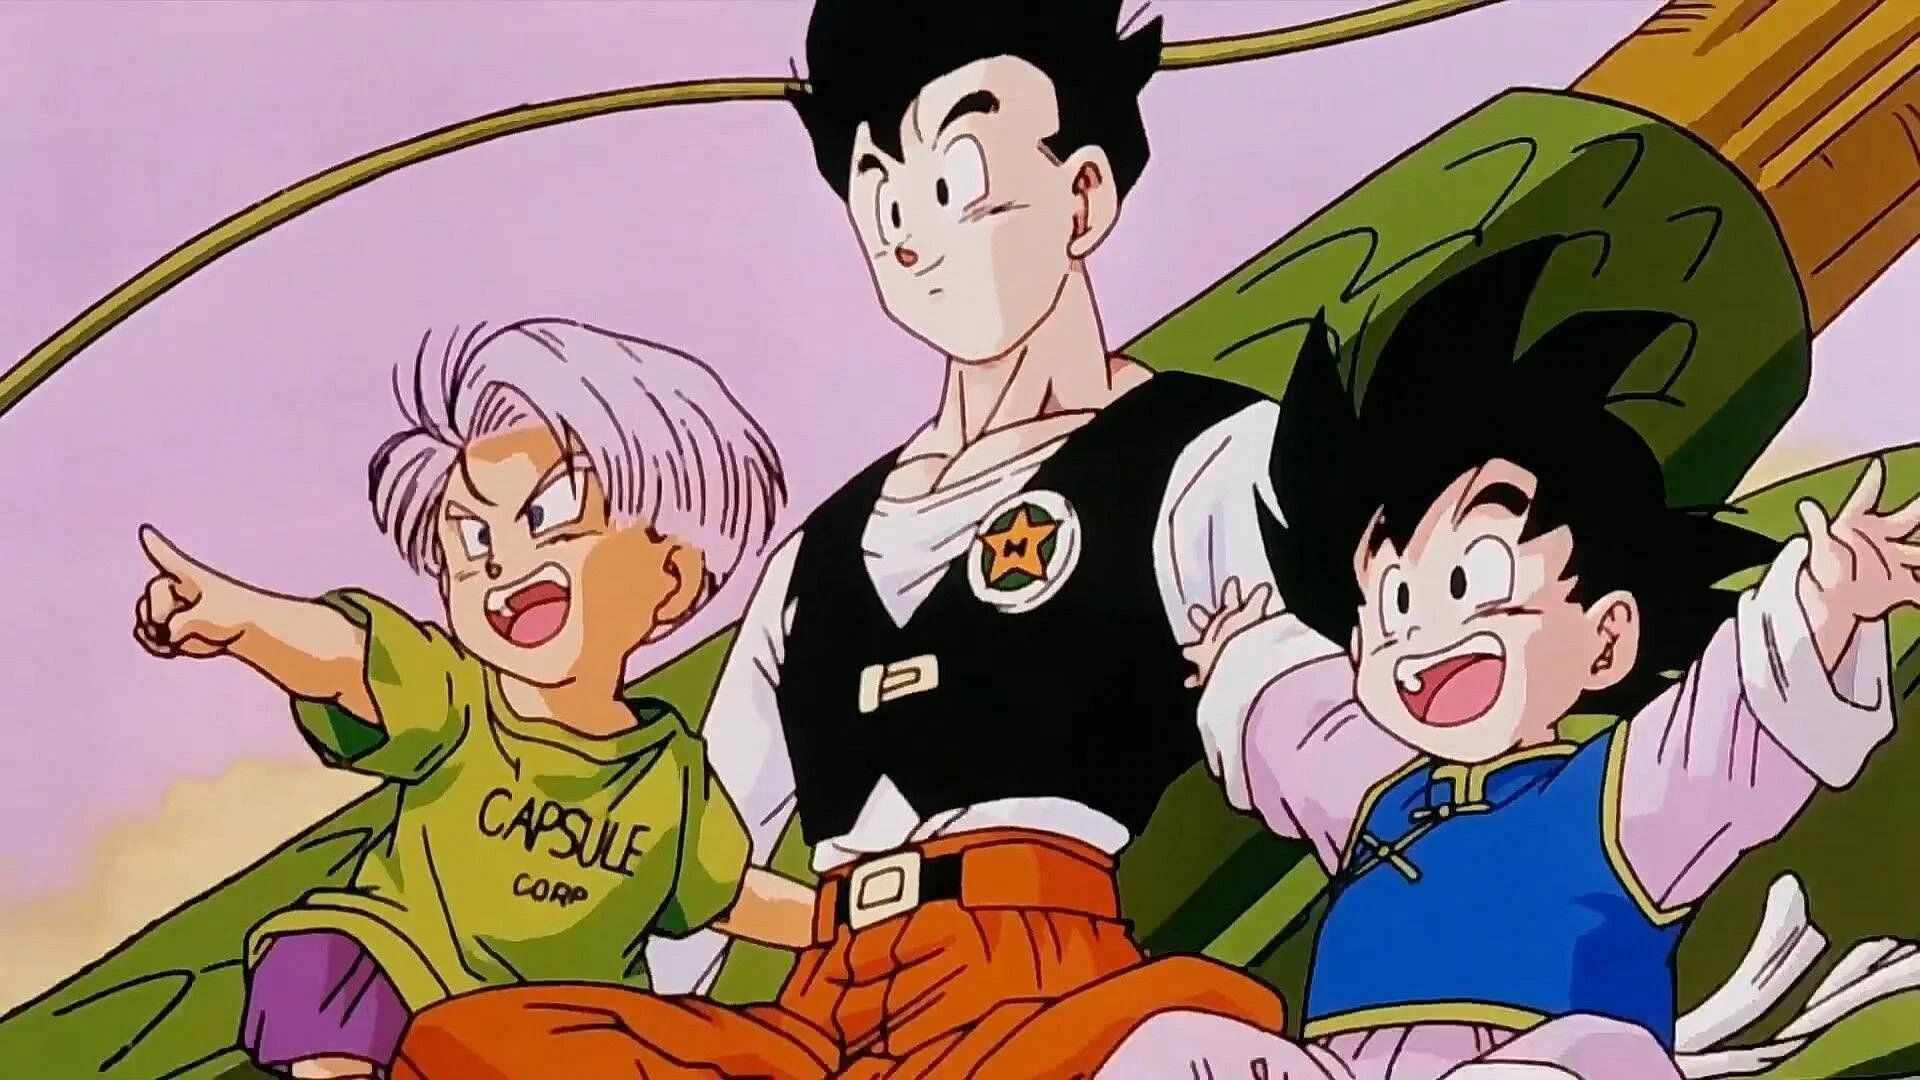 Trunks, Gohan, and Goten in the Z anime (Image via Toei Animation).